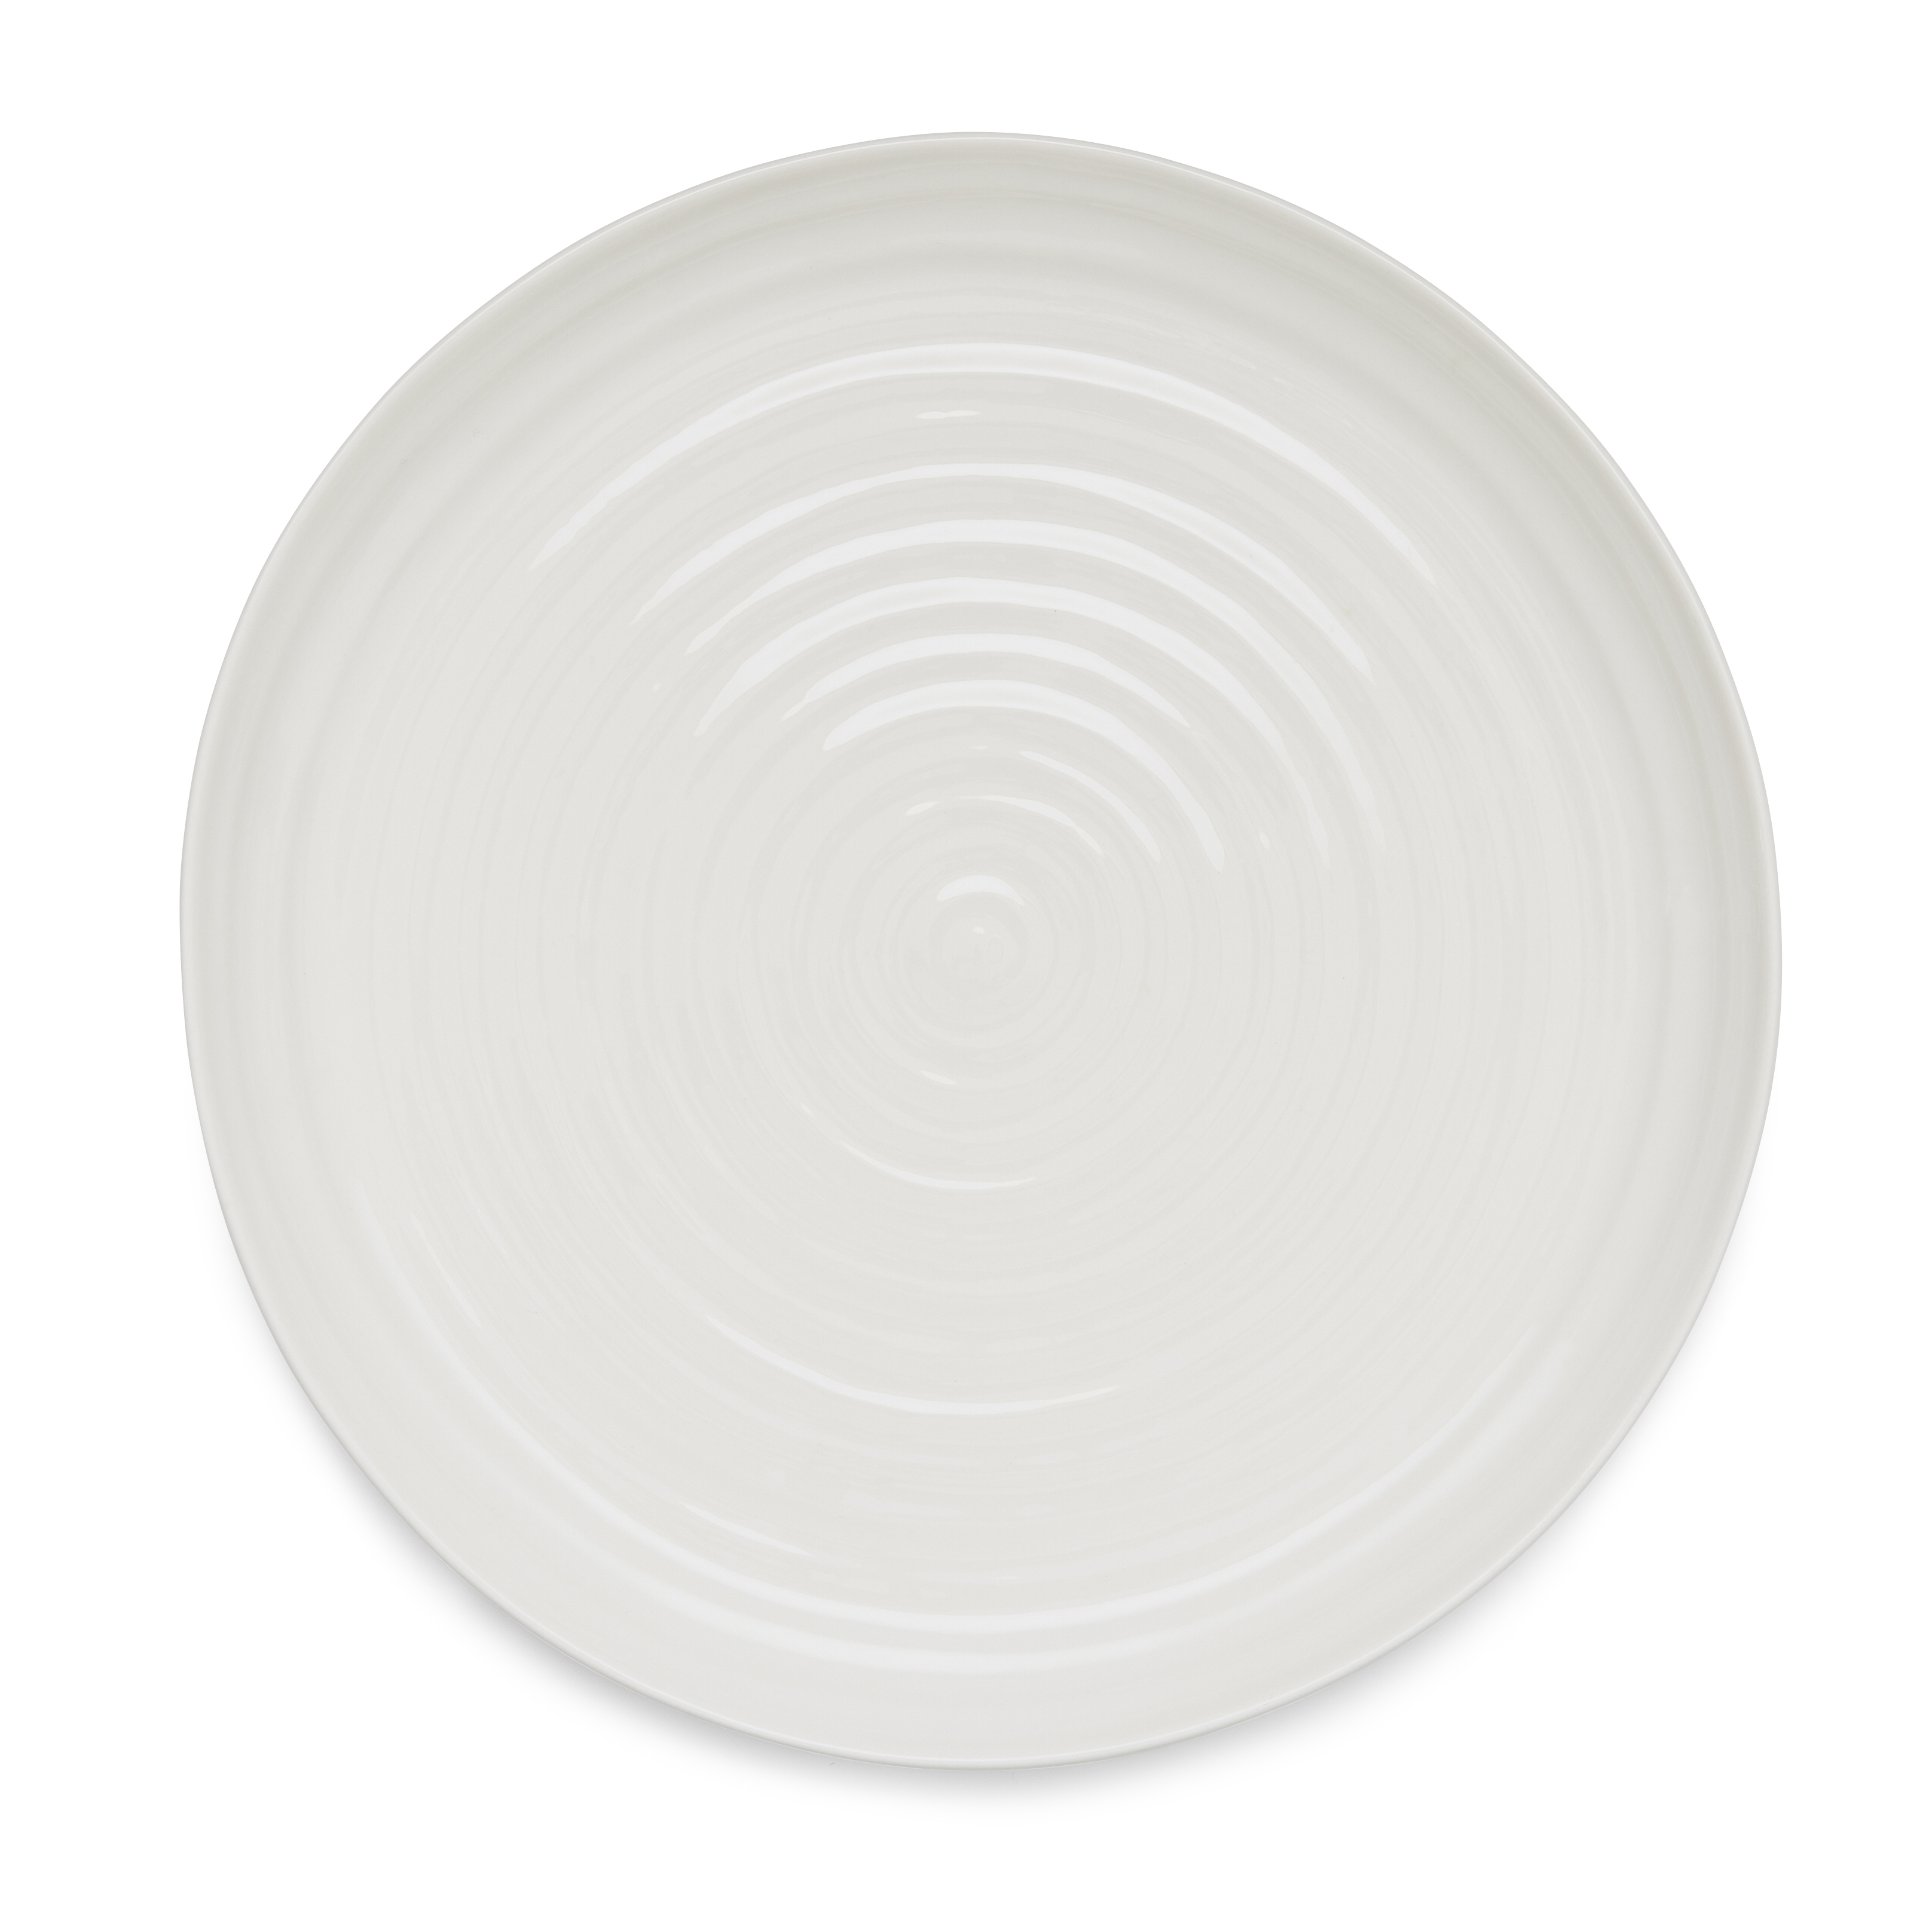 Sophie Conran Round Platter, White image number null